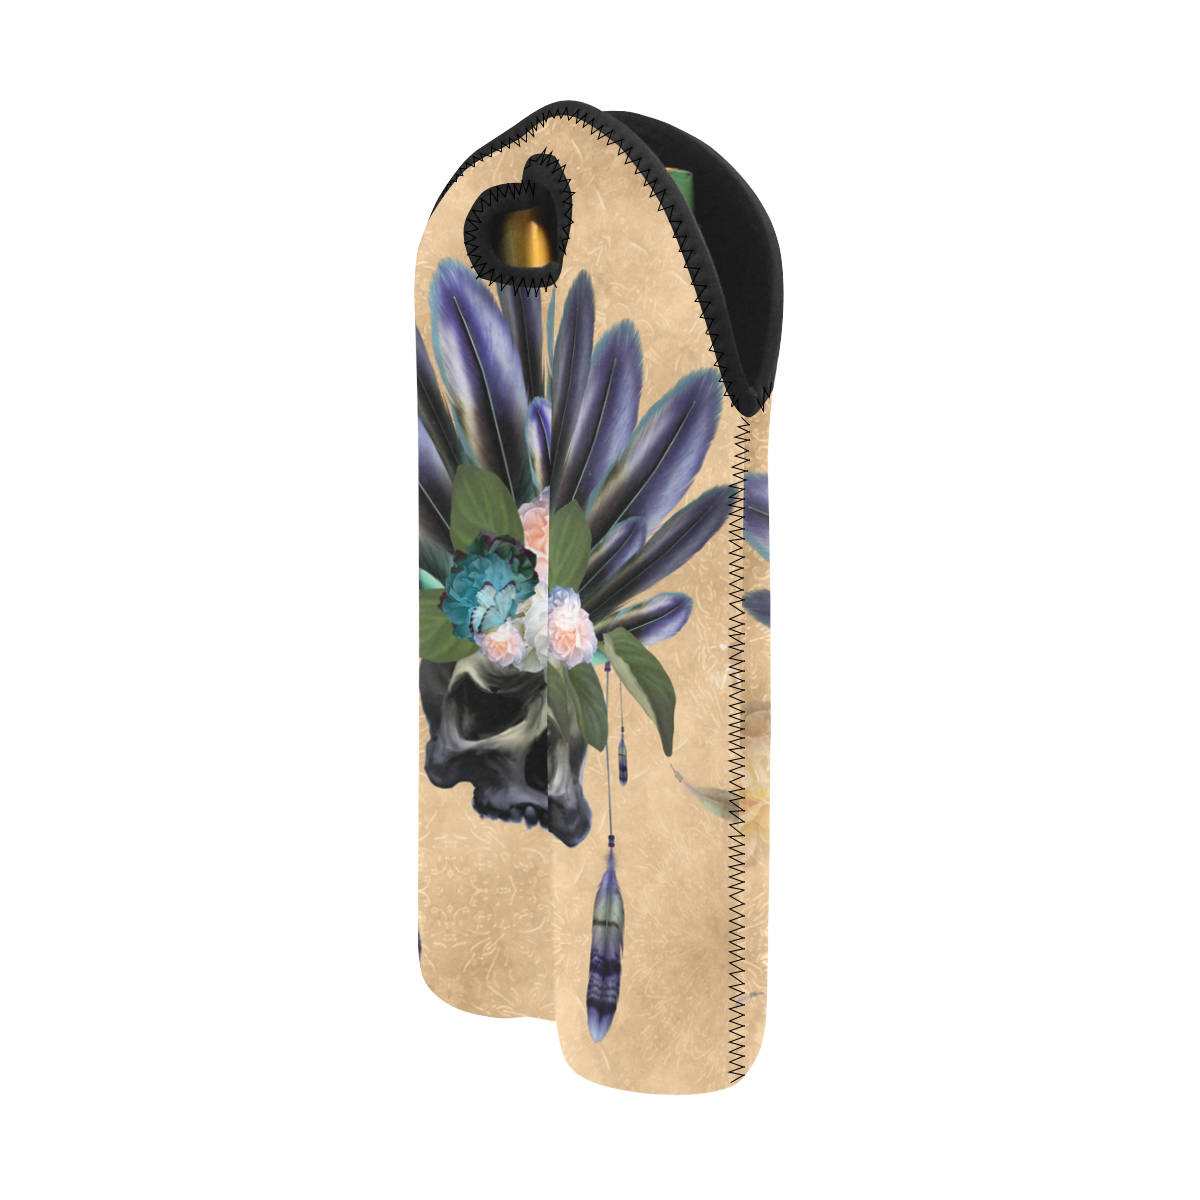 Cool skull with feathers and flowers 2-Bottle Neoprene Wine Bag